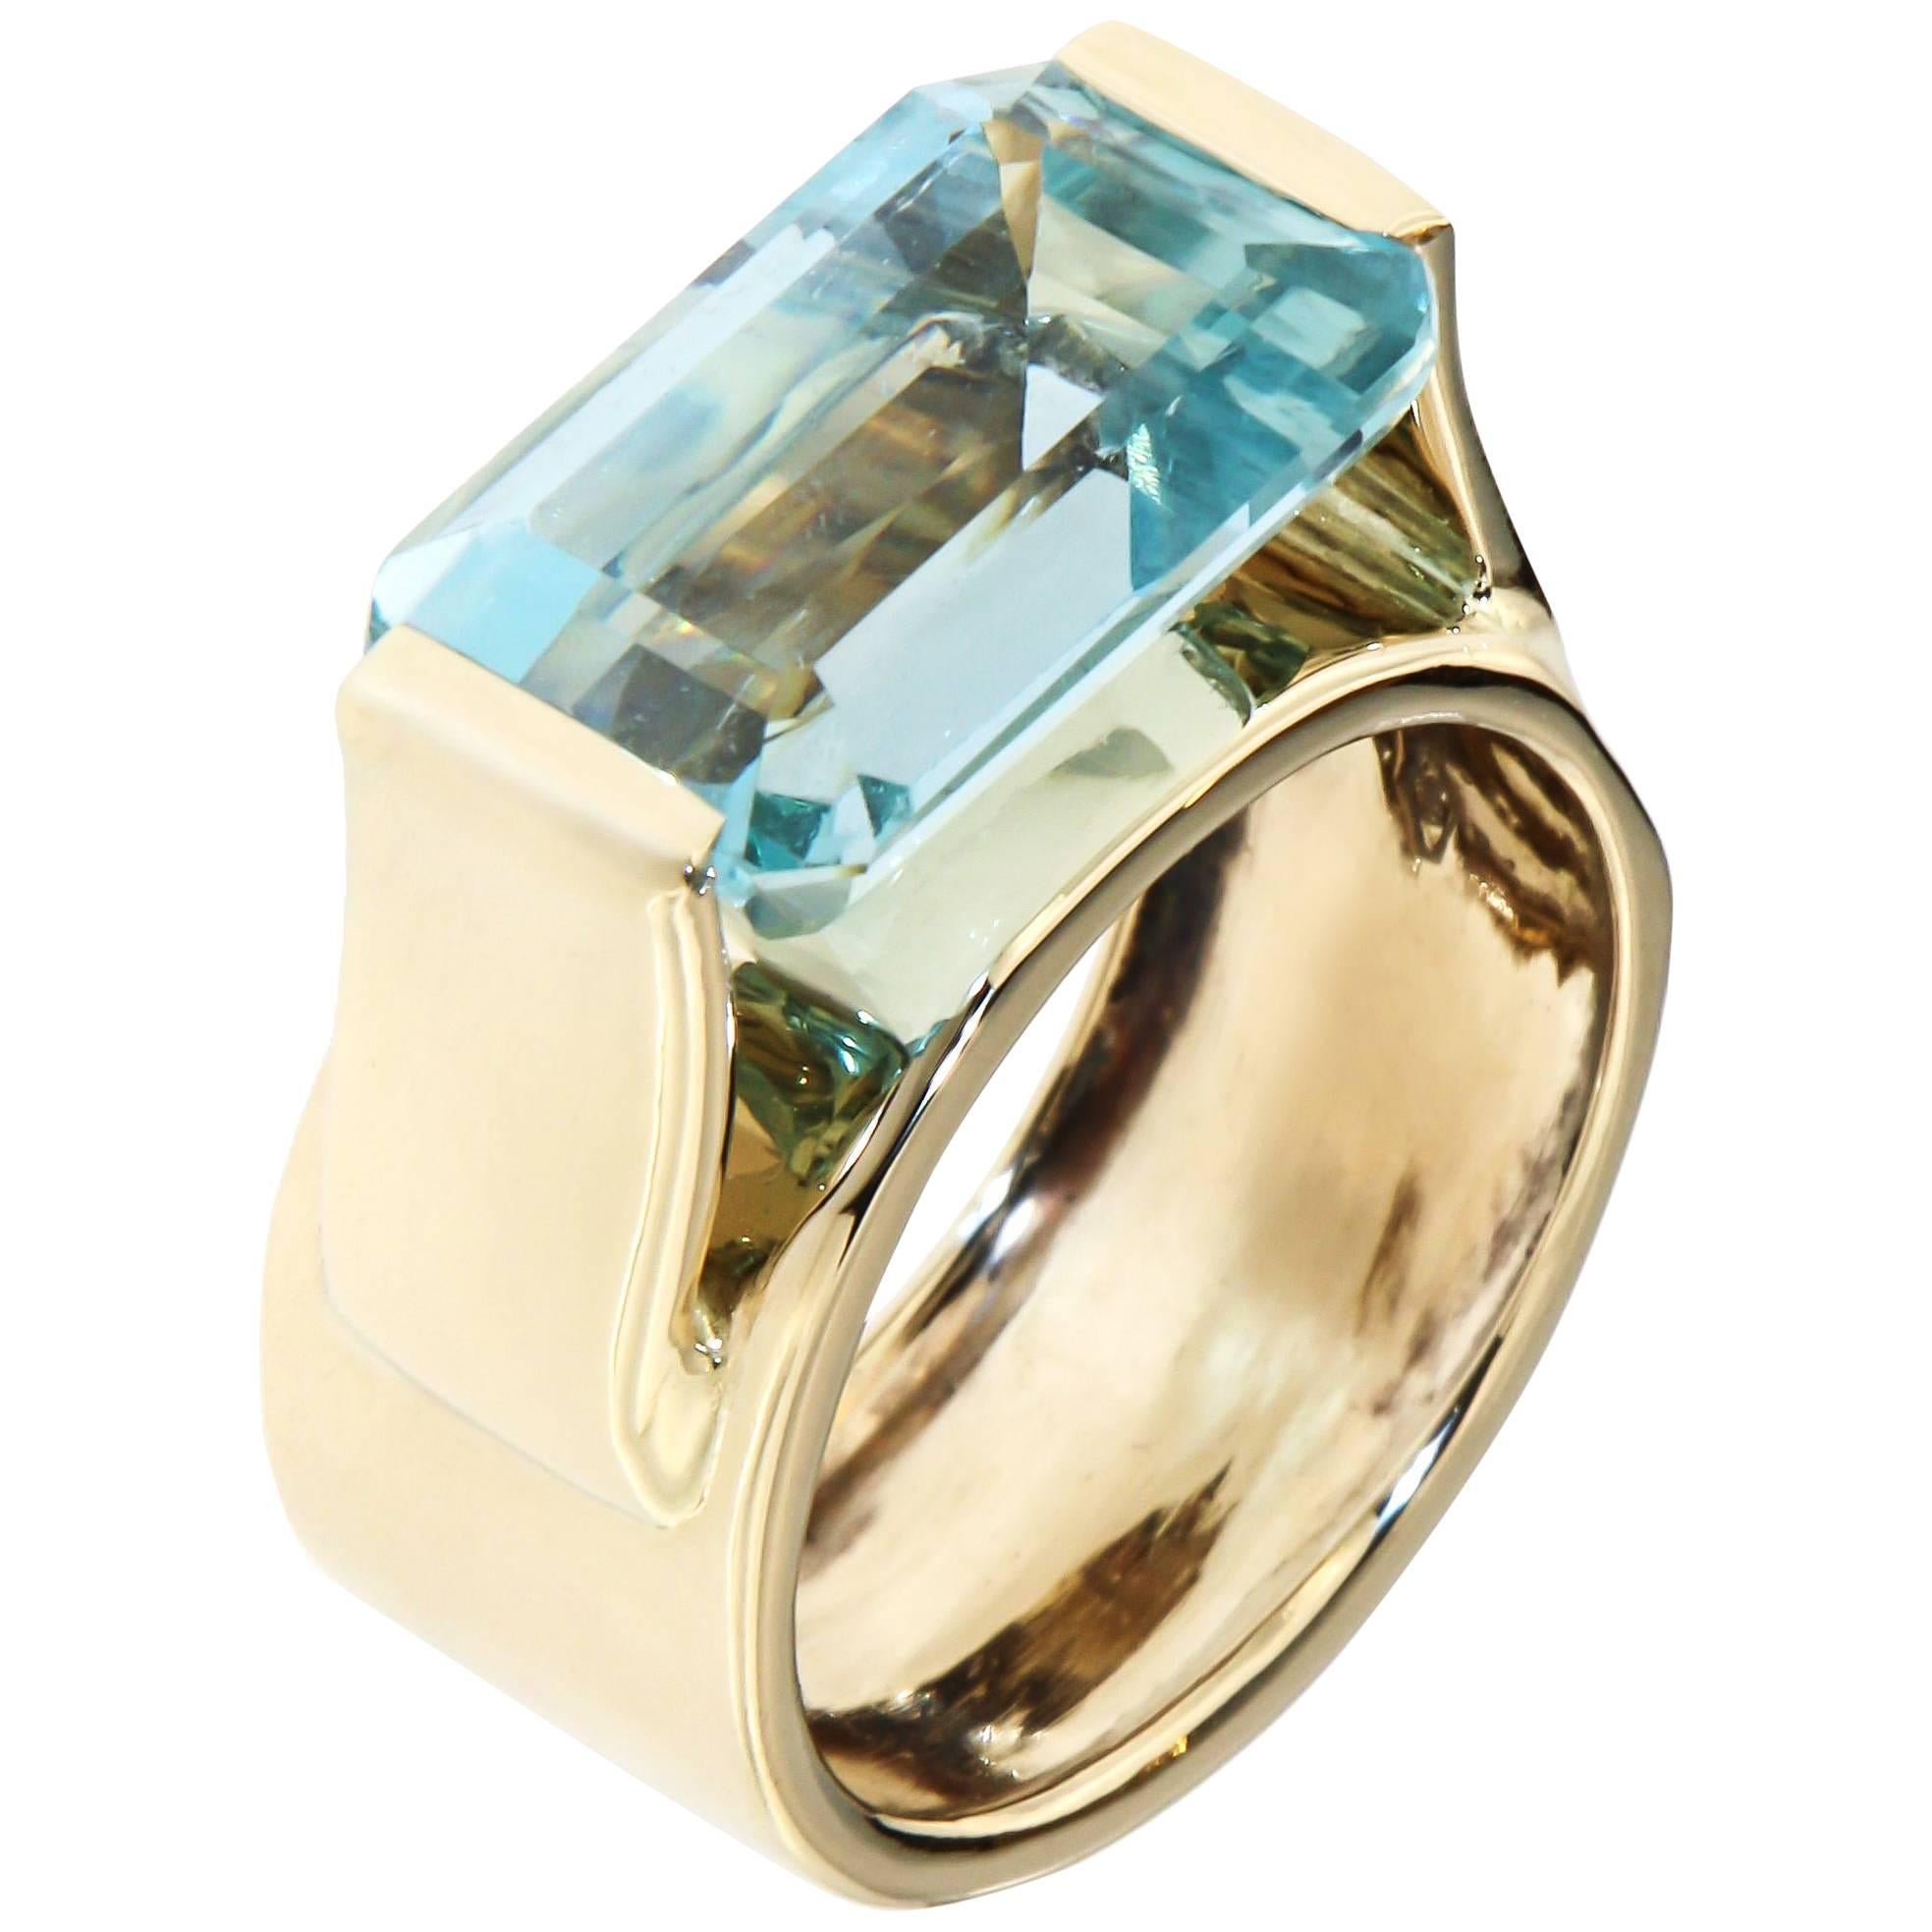 Aquamarine White 18 Kt Gold Cocktail Ring Handcrafted in Italy by Botta Gioielli